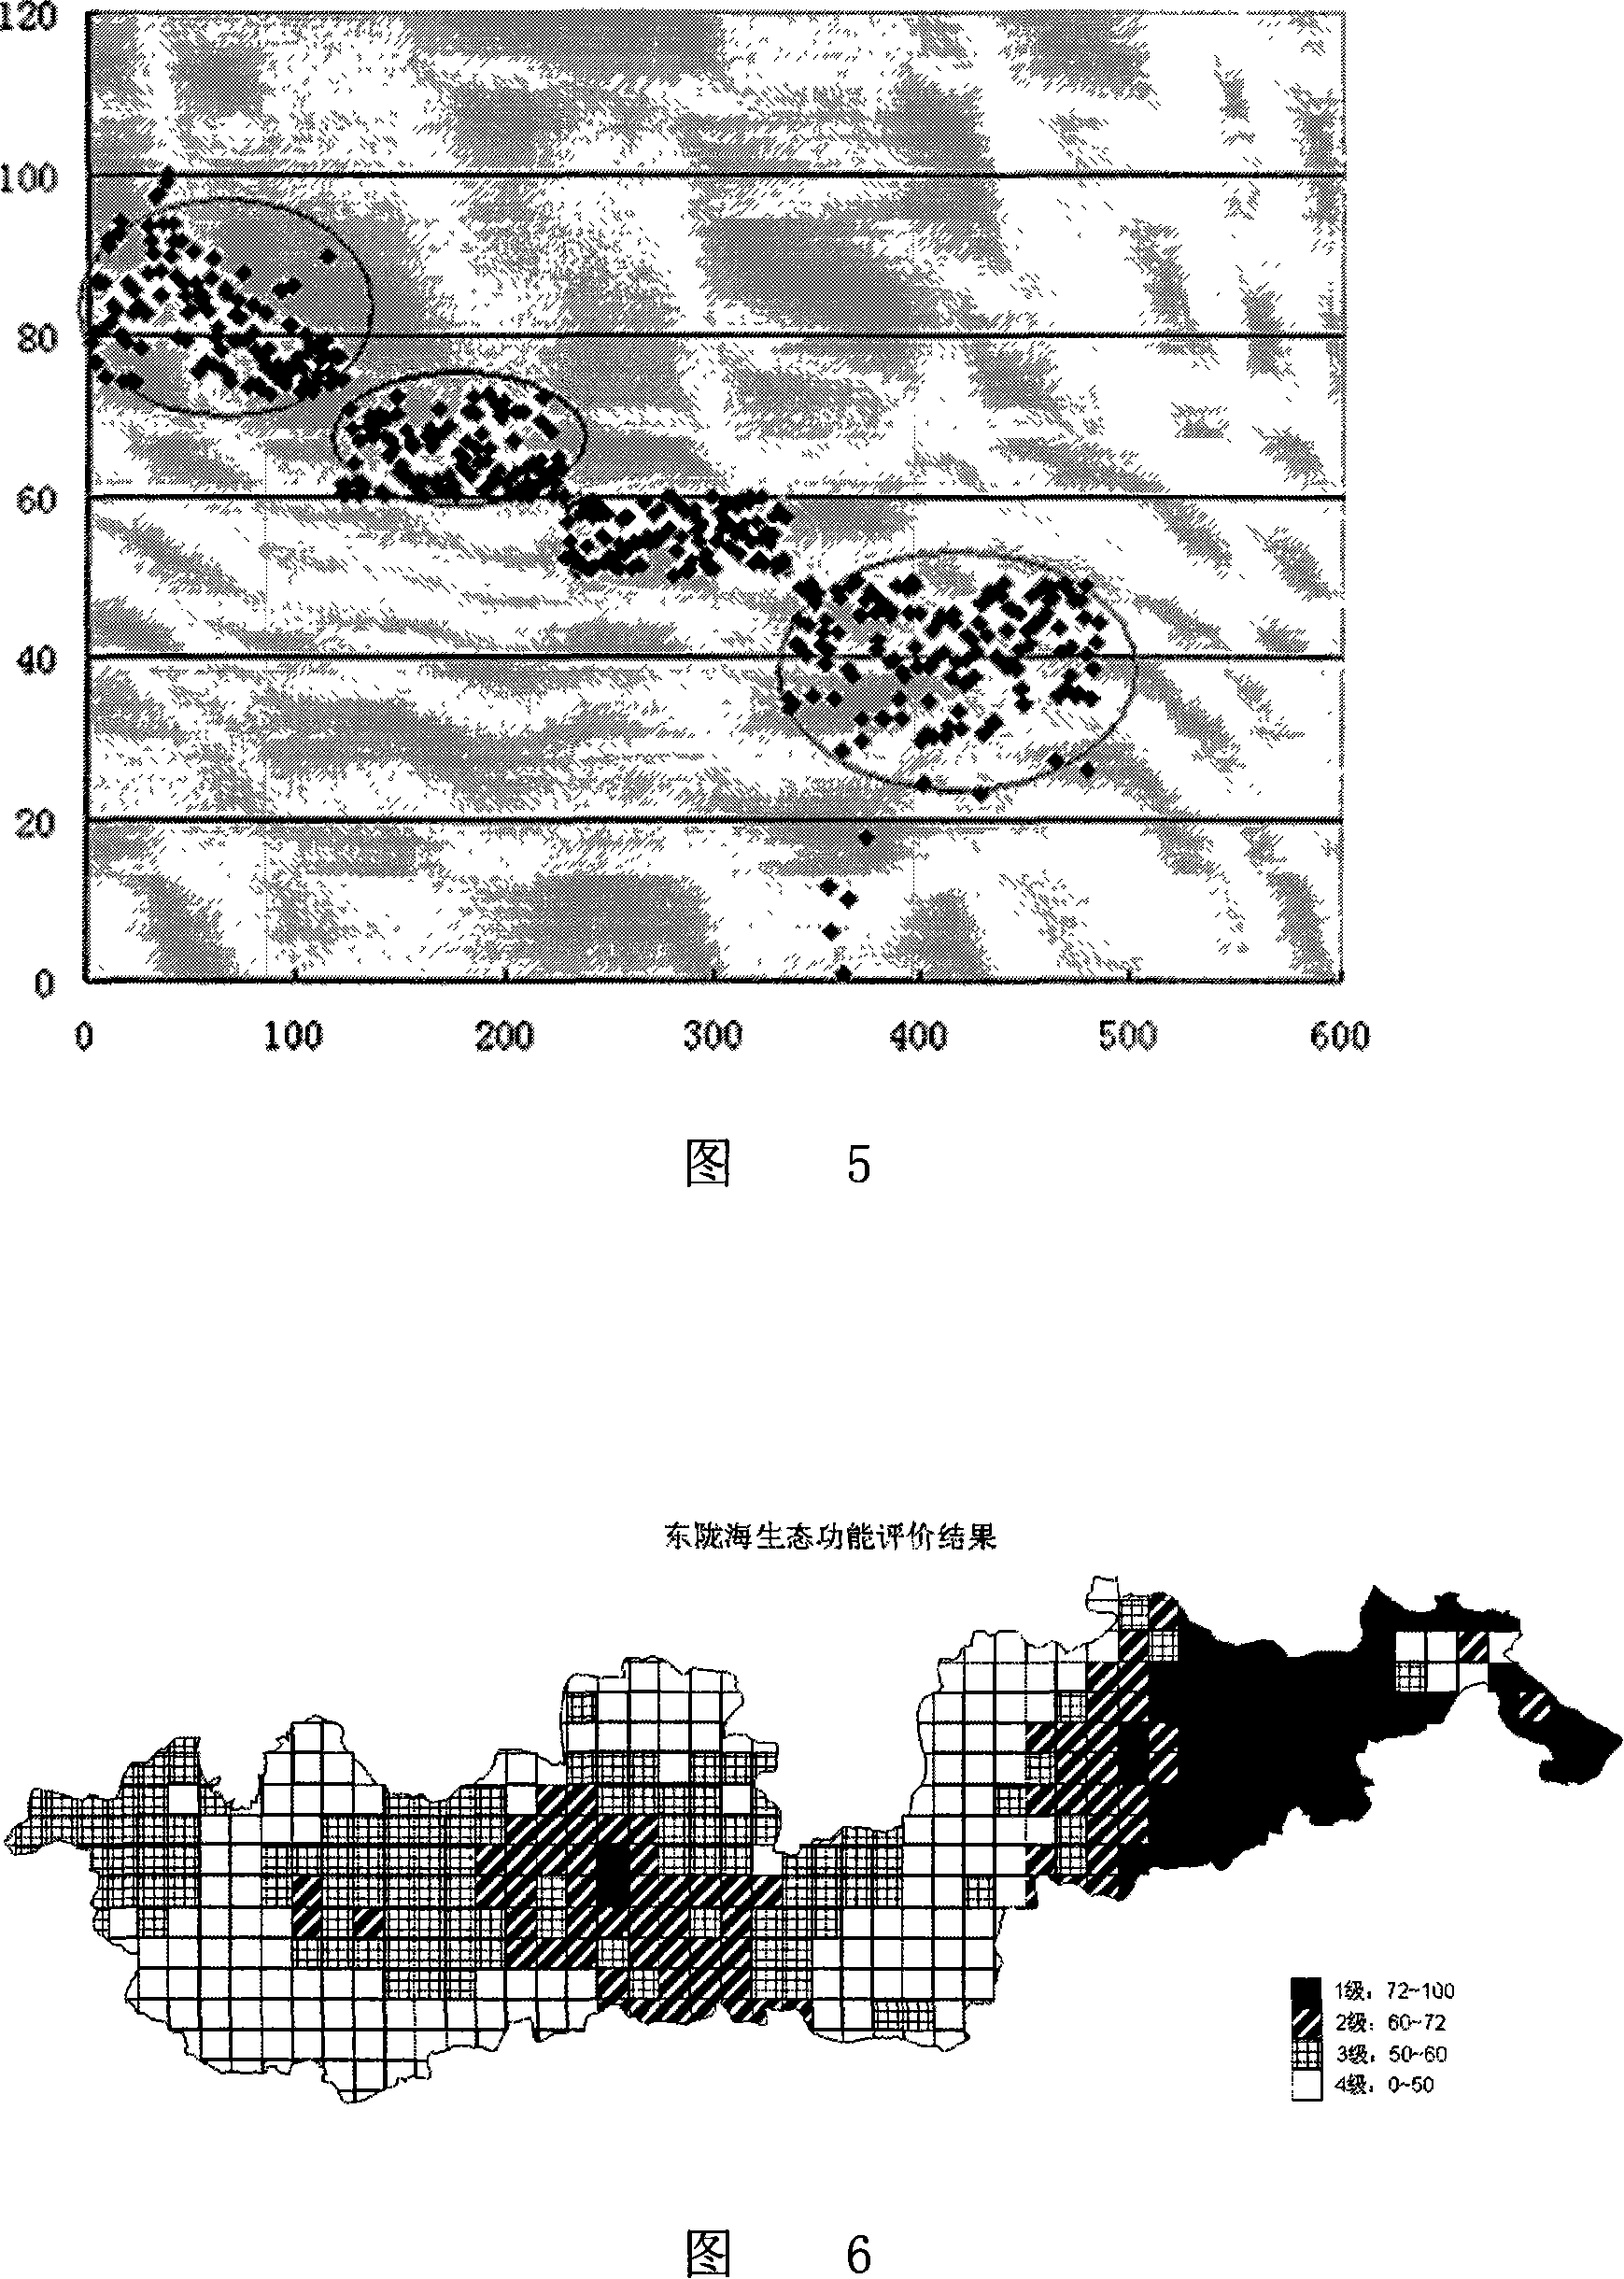 Method for distinguishing ecological function with geographical information systems and remote sensing technique